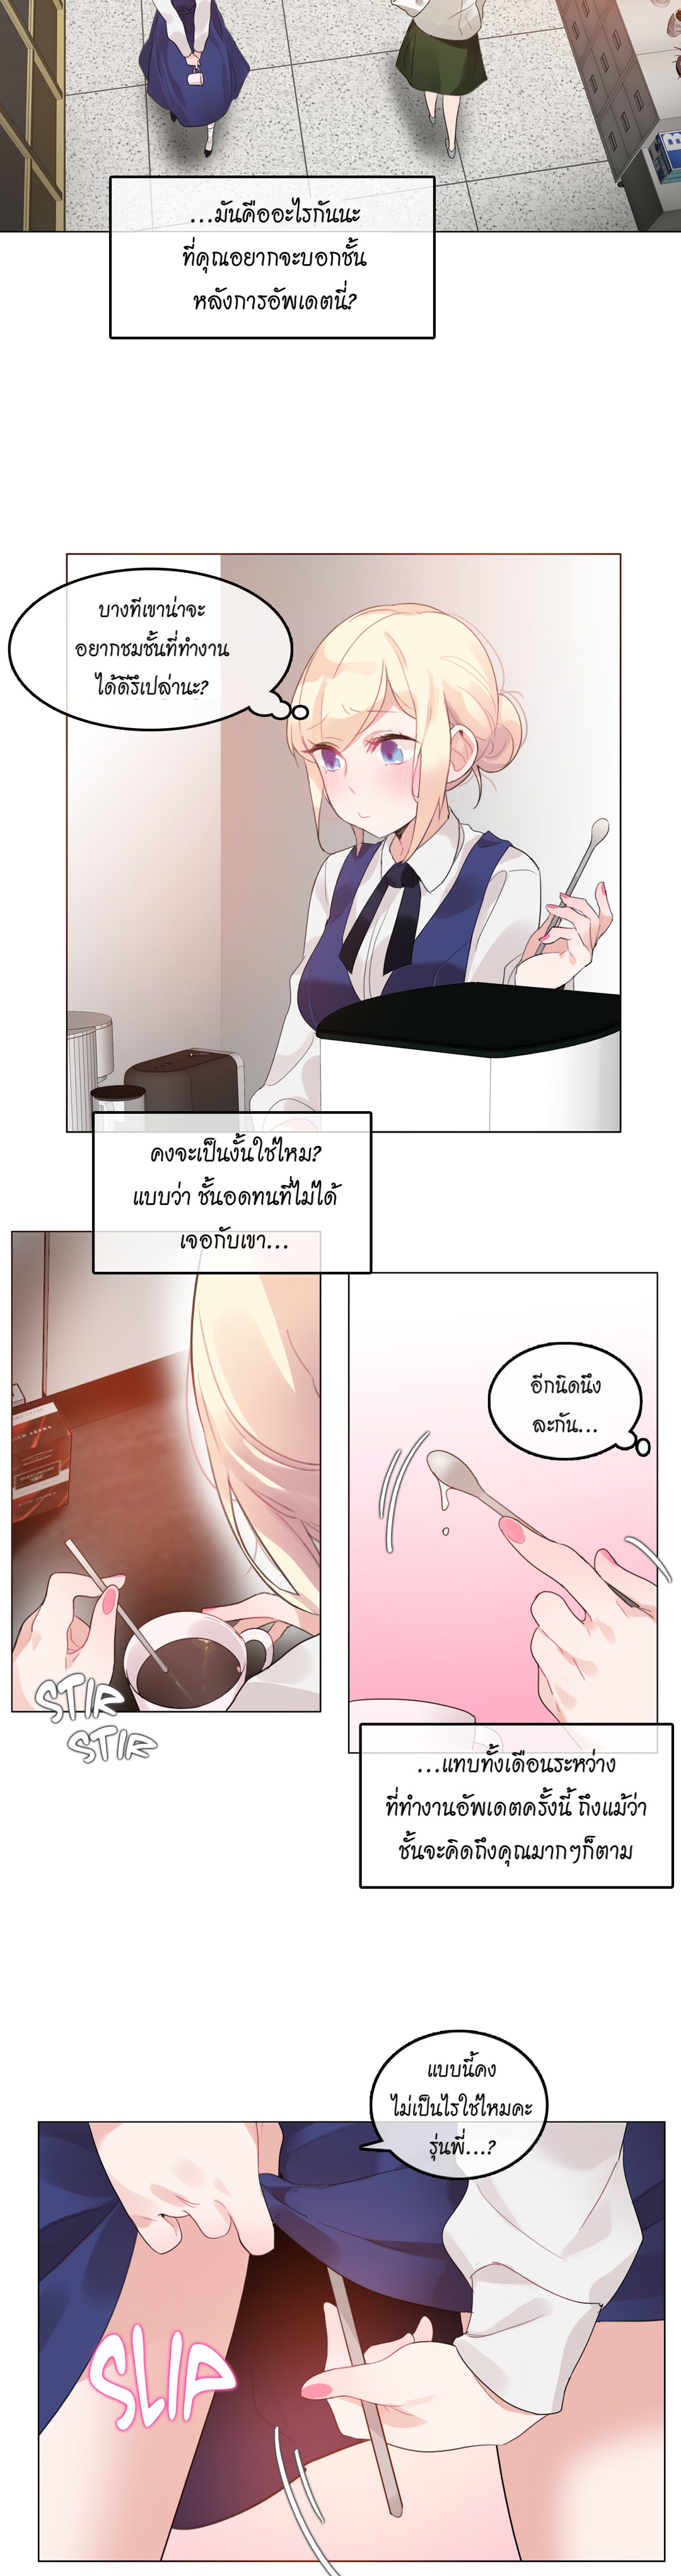 A Pervert’s Daily Life55 (3)